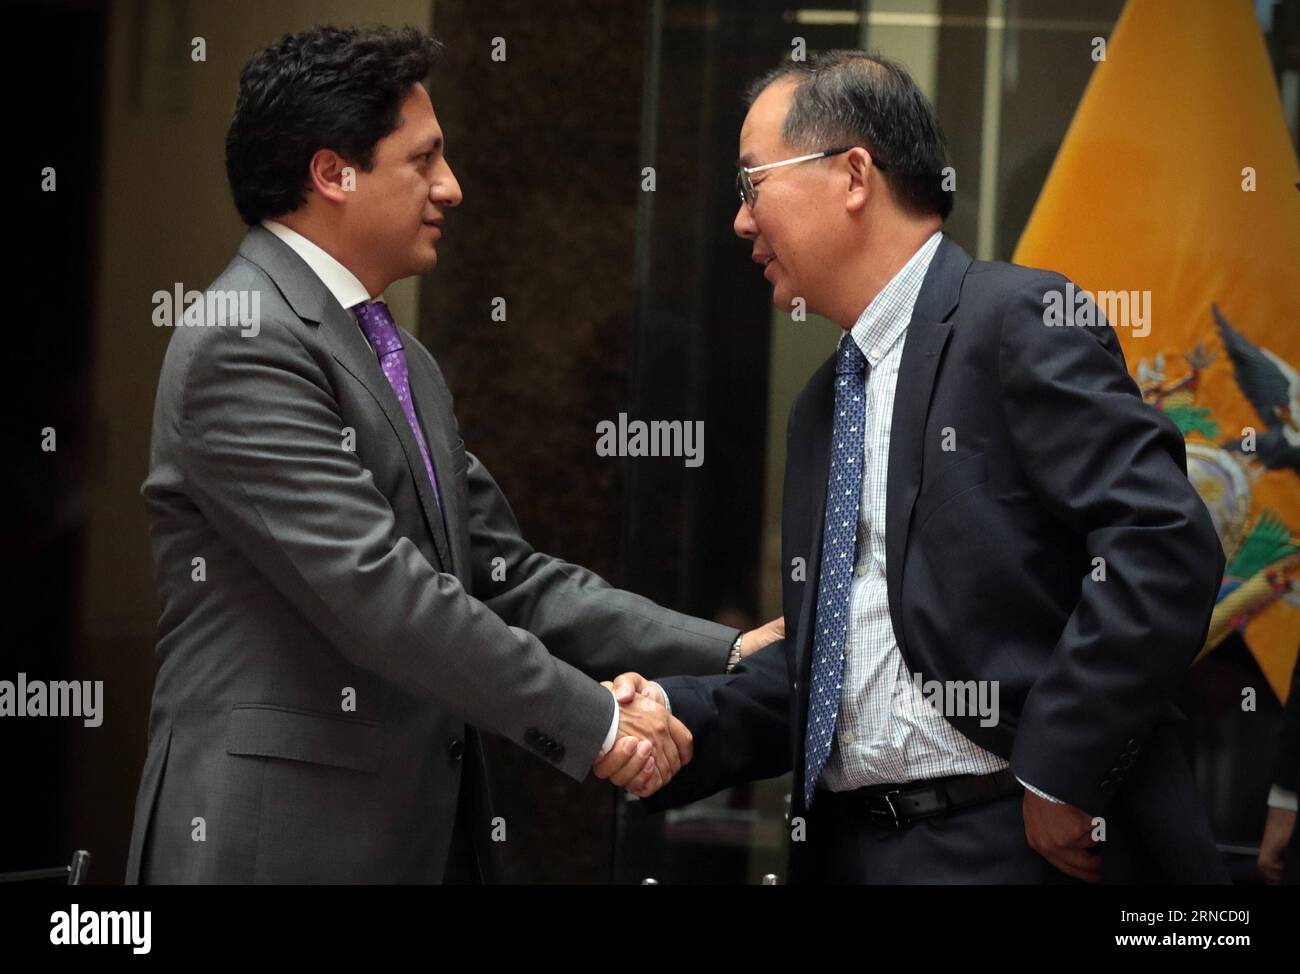 QUITO, April 4, 2016 -- Chen Weilong (R), representative of China s Sinopec International and a member of Penaturi Consortium, shakes hands with Rafael Poveda, coordinating minister of strategic sectors of Ecuador, after the signing of a service contract in the Protocolar Hall of Ecuador s Vicepresidency, in Quito, capital of Ecuador, on April 4, 2016. Ecuador s government-owned Petroamazonas signed nine service contracts on Monday with international consortiums in efforts to develop its mature oil fields. Panaturi Consortium, made up of China s Sinopec International and Sinopec Service Ecuado Stock Photo